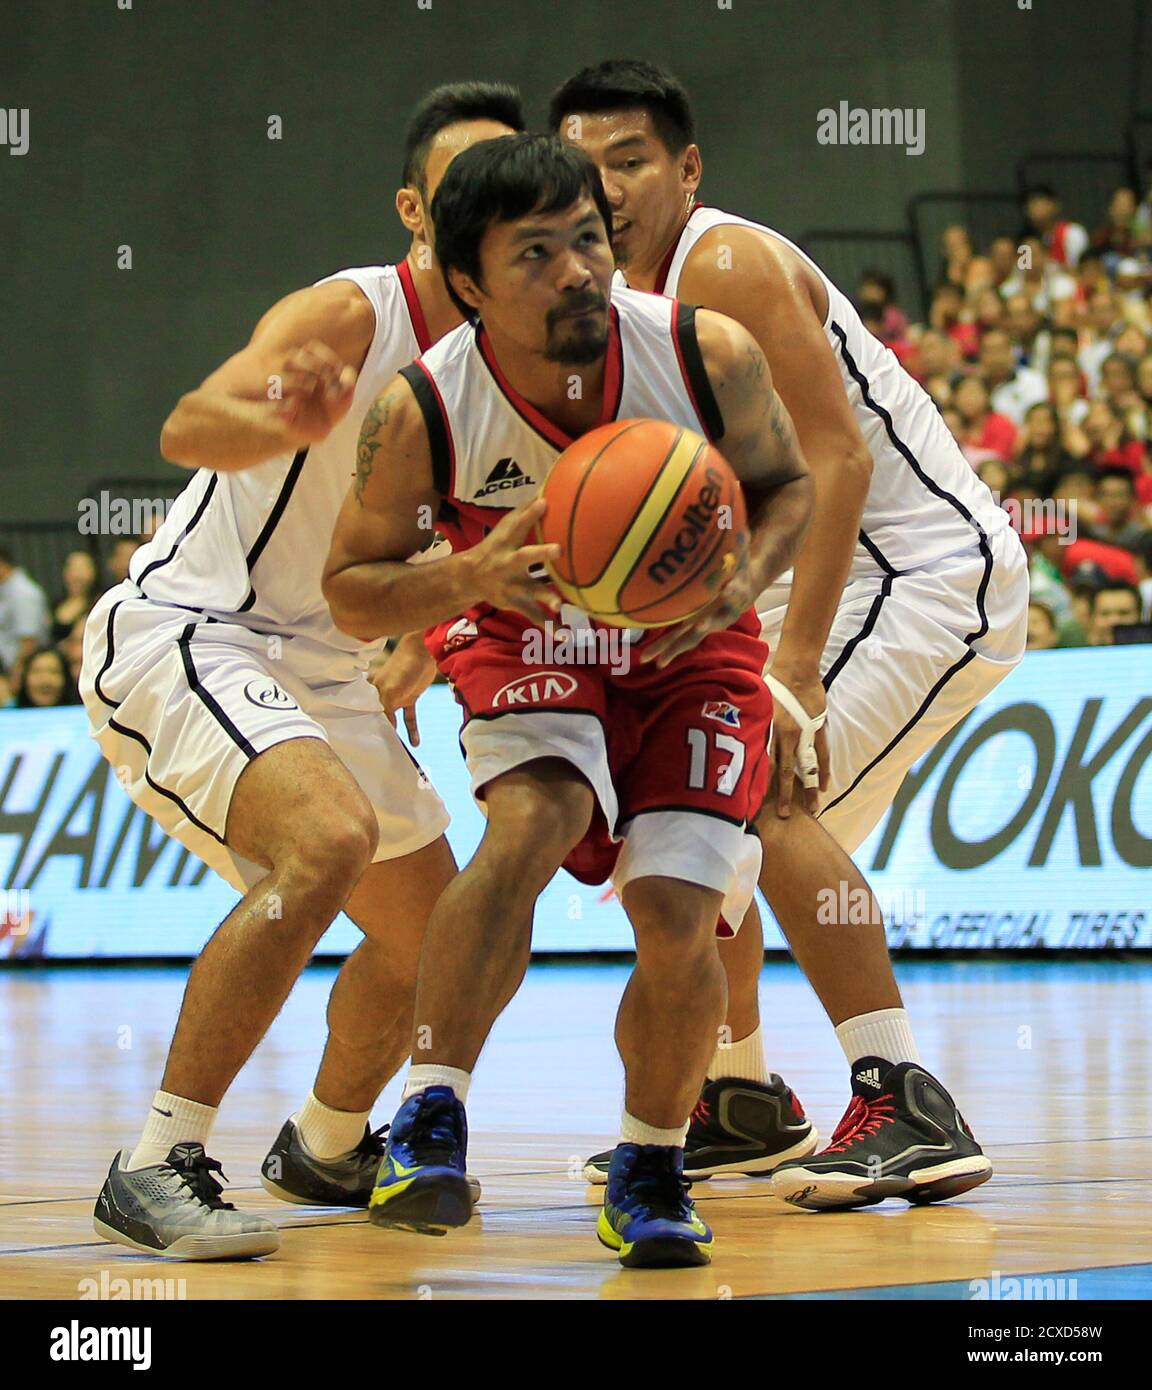 Manny Pacquiao, a playing coach of KIA-Sorento, is guarded by players of  Blackwater-Elite during the first quarter of the 40th Season of the Philippine  Basketball Association (PBA) games in Bocaue town, Bulacan